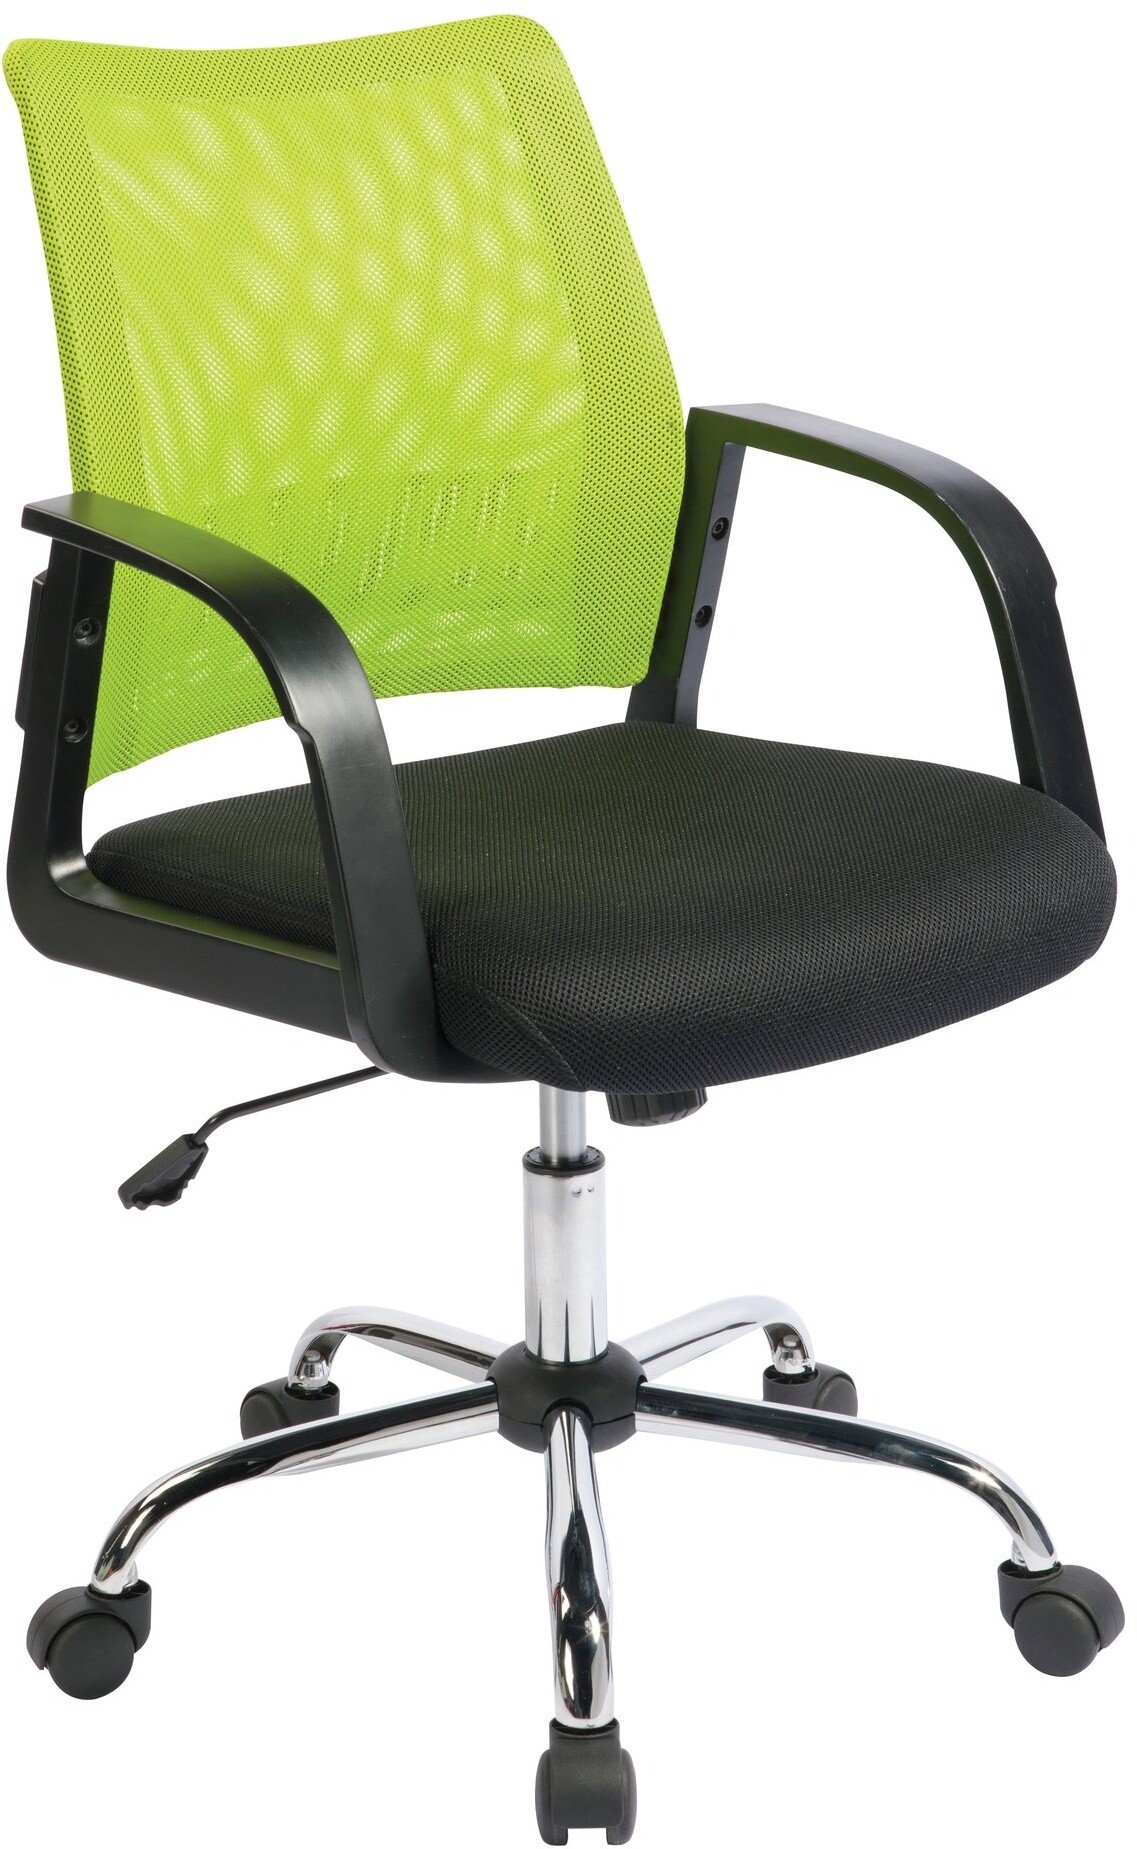 Best priced comfy task chairs